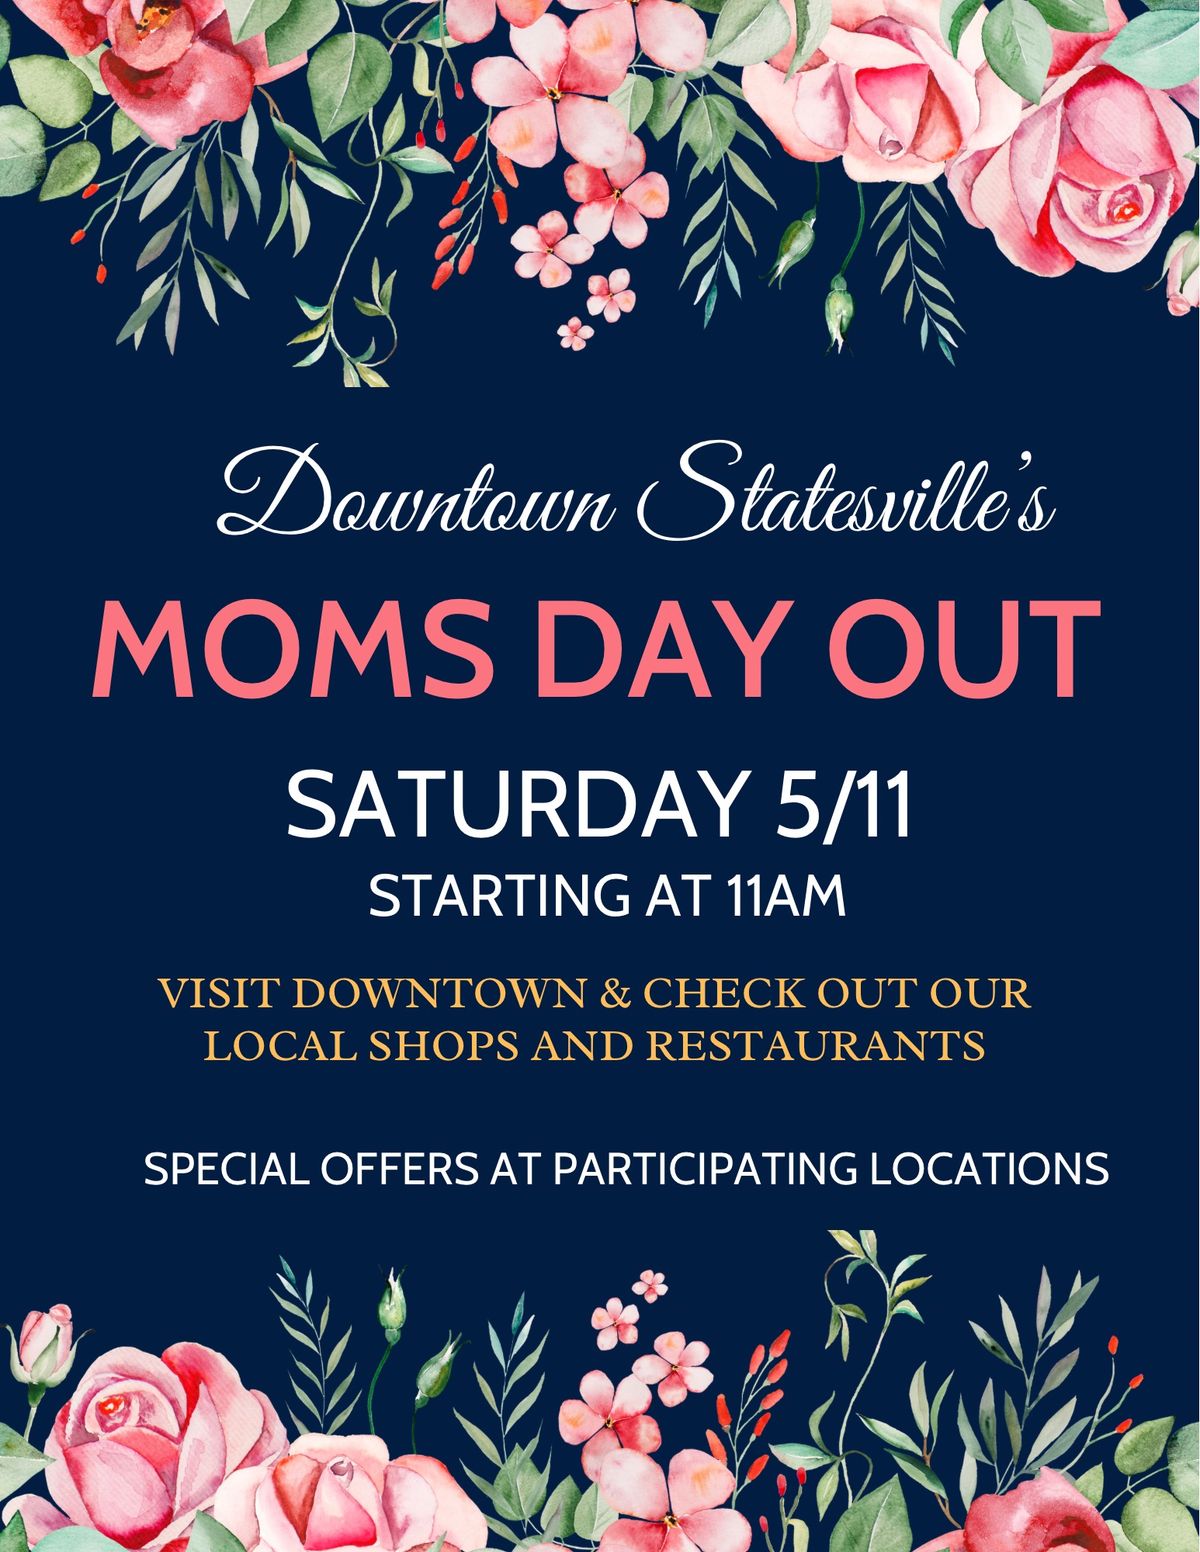 Downtown Statesville\u2019s Moms Day Out